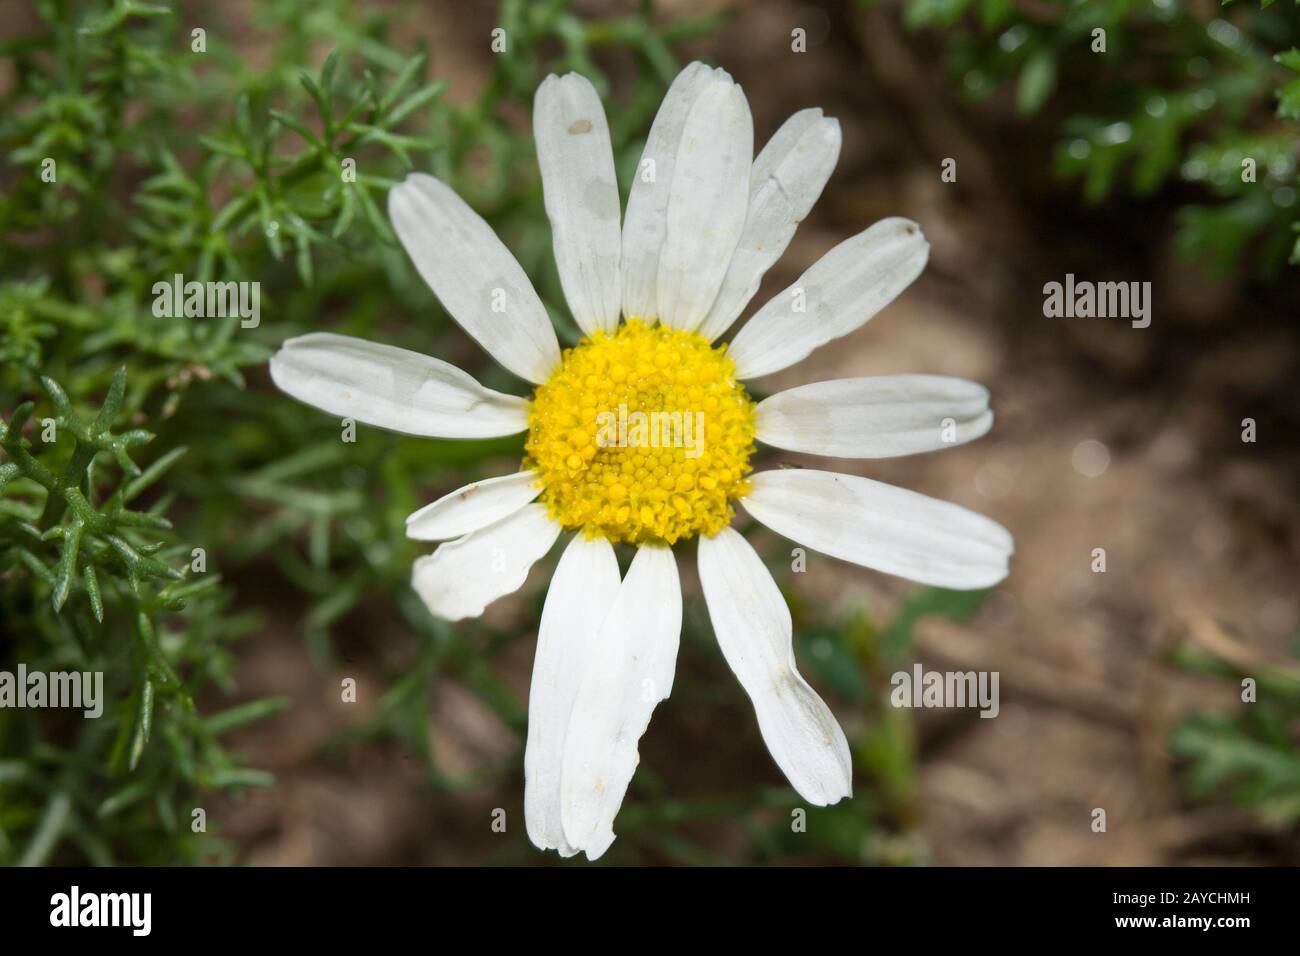 Closeup of a daisy with natural background. Color photo. Photo taken from the top. The petals of the flower are irregular and damaged. Stock Photo